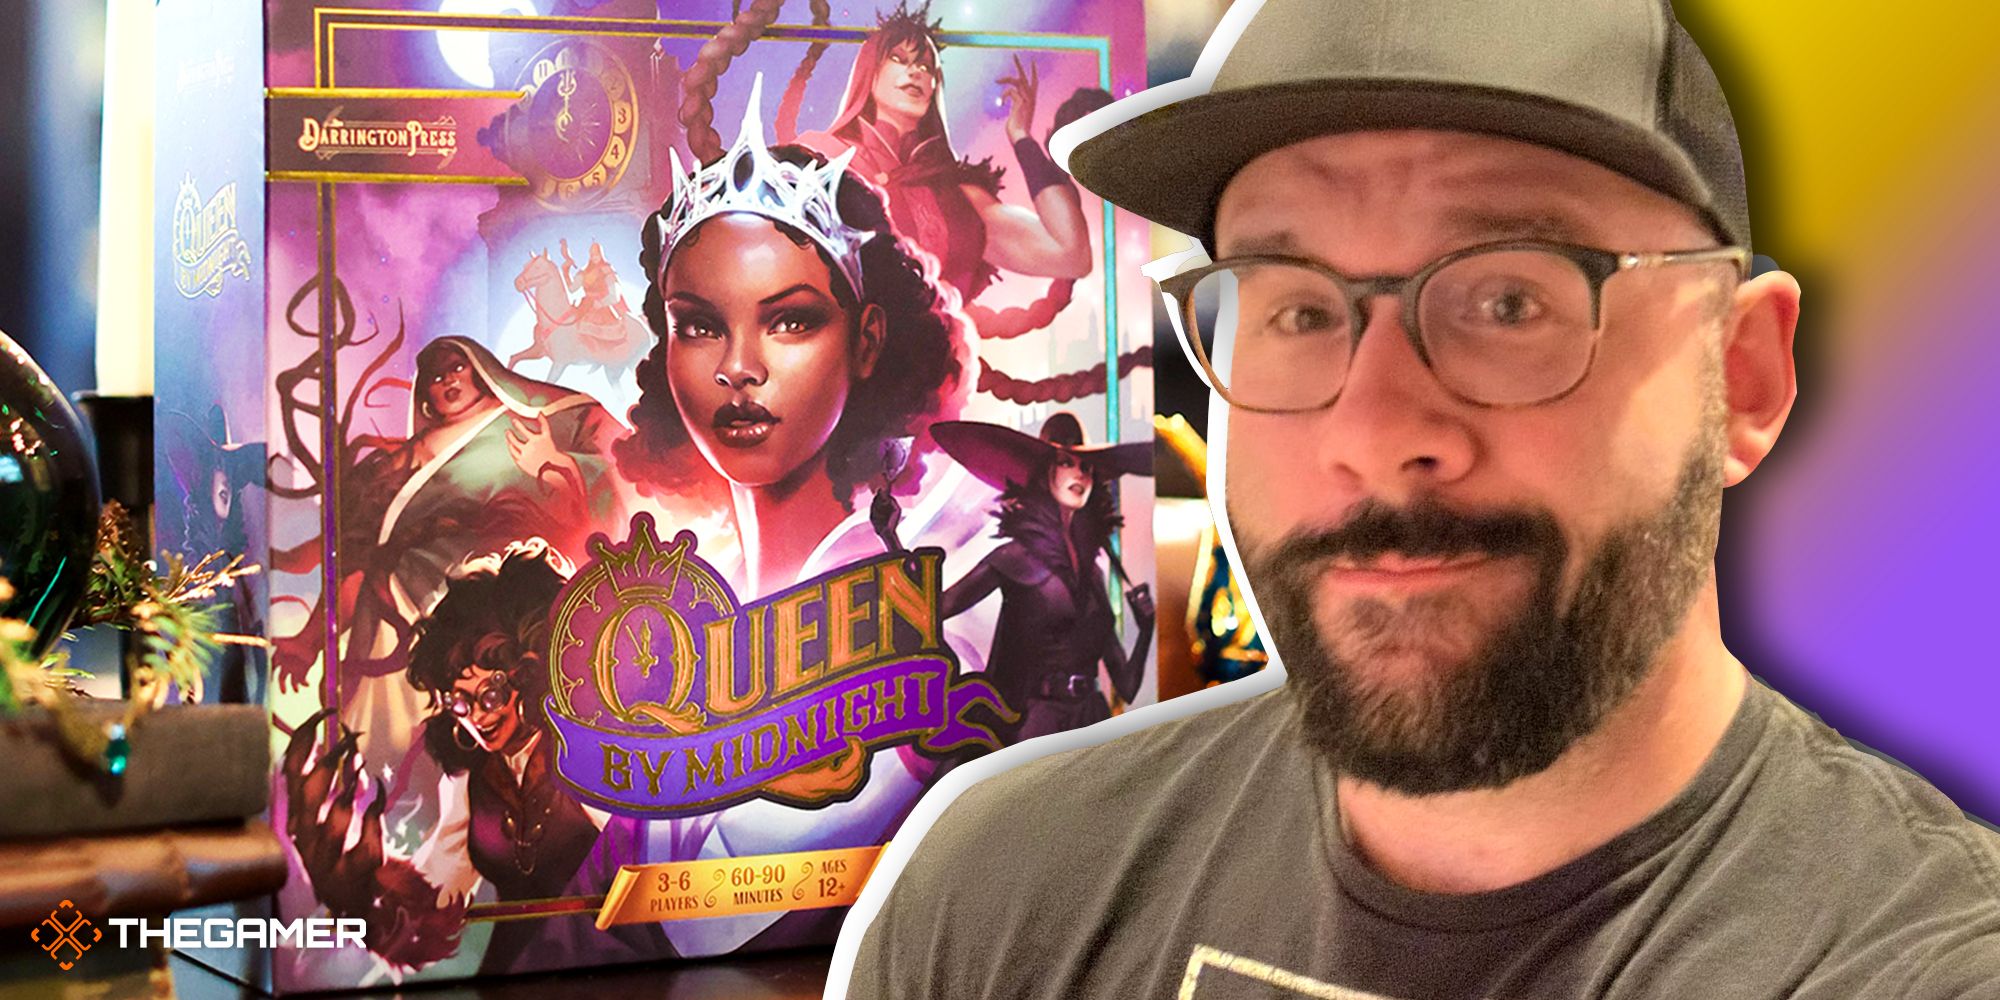 Queen by Midnight board game with headshot of its designer, Kyle Shire